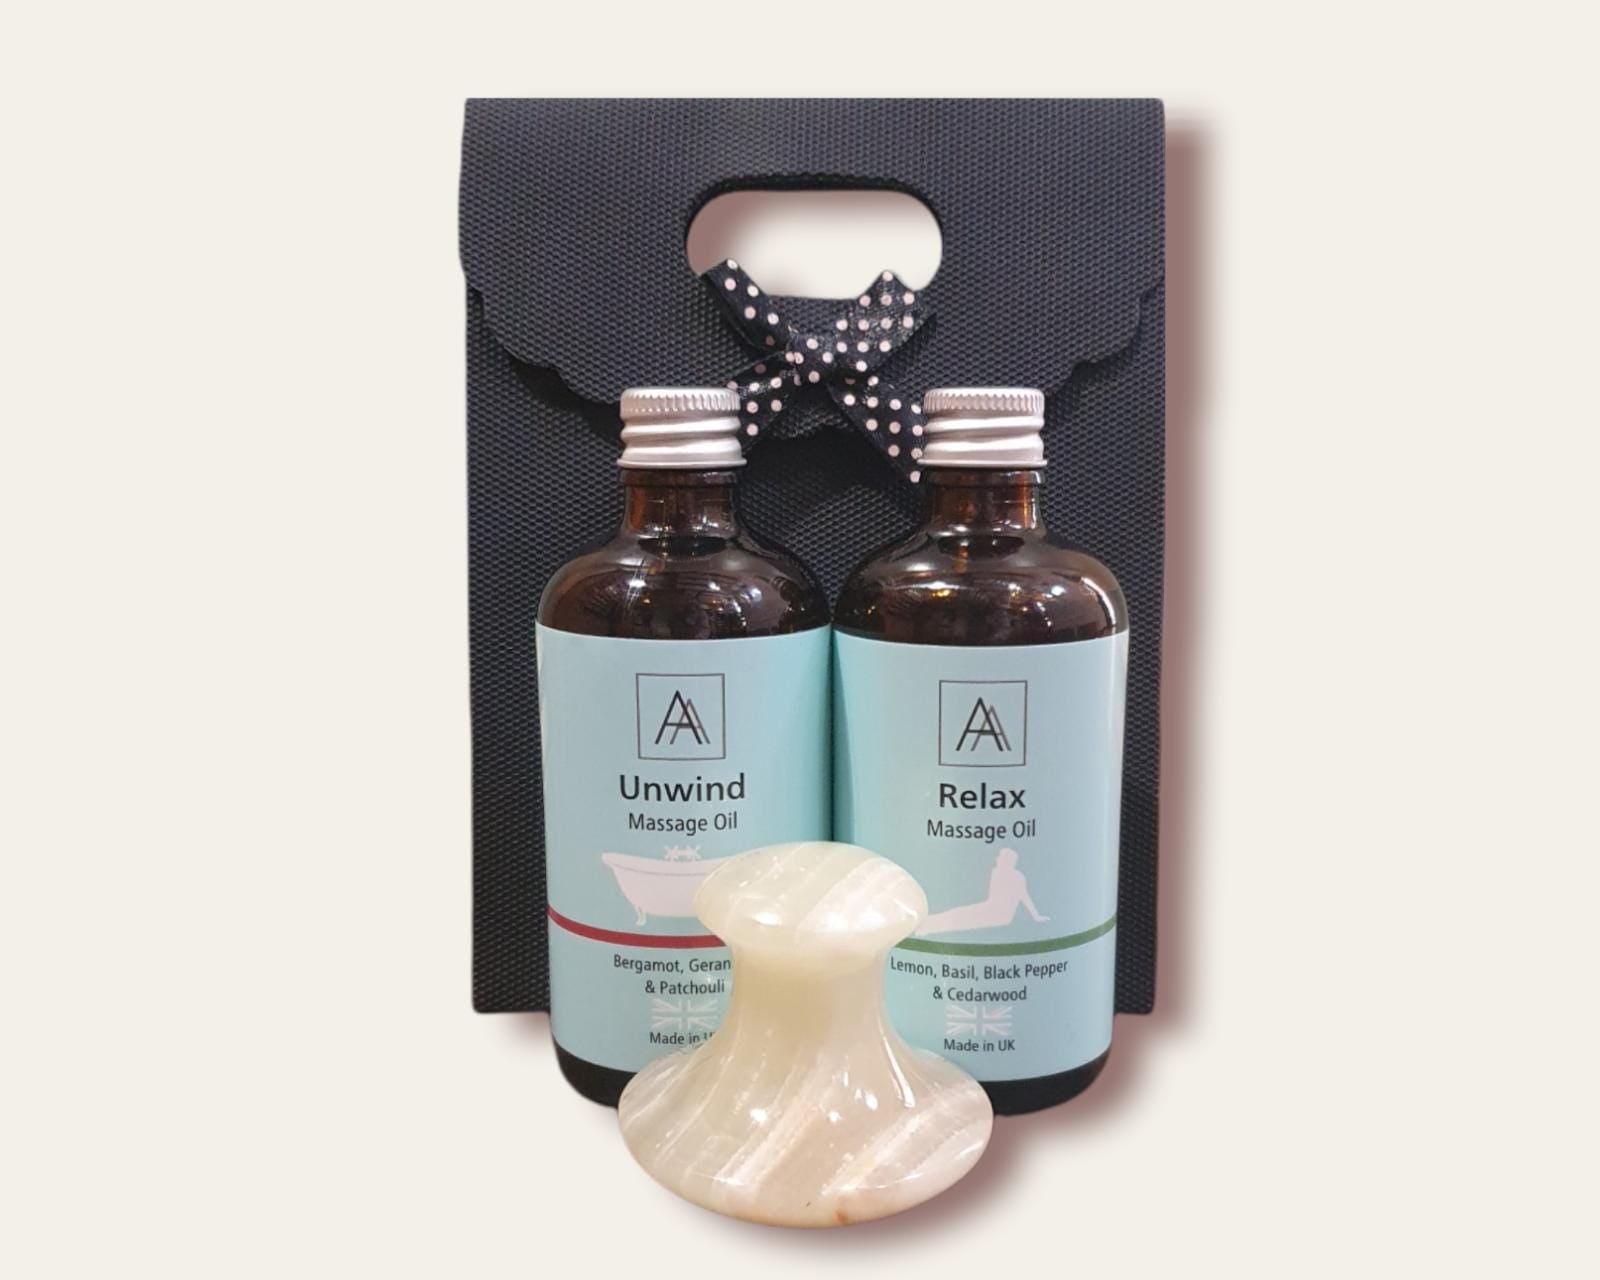 Unwind and Relax Massage Oil Gift set with Marble Massager